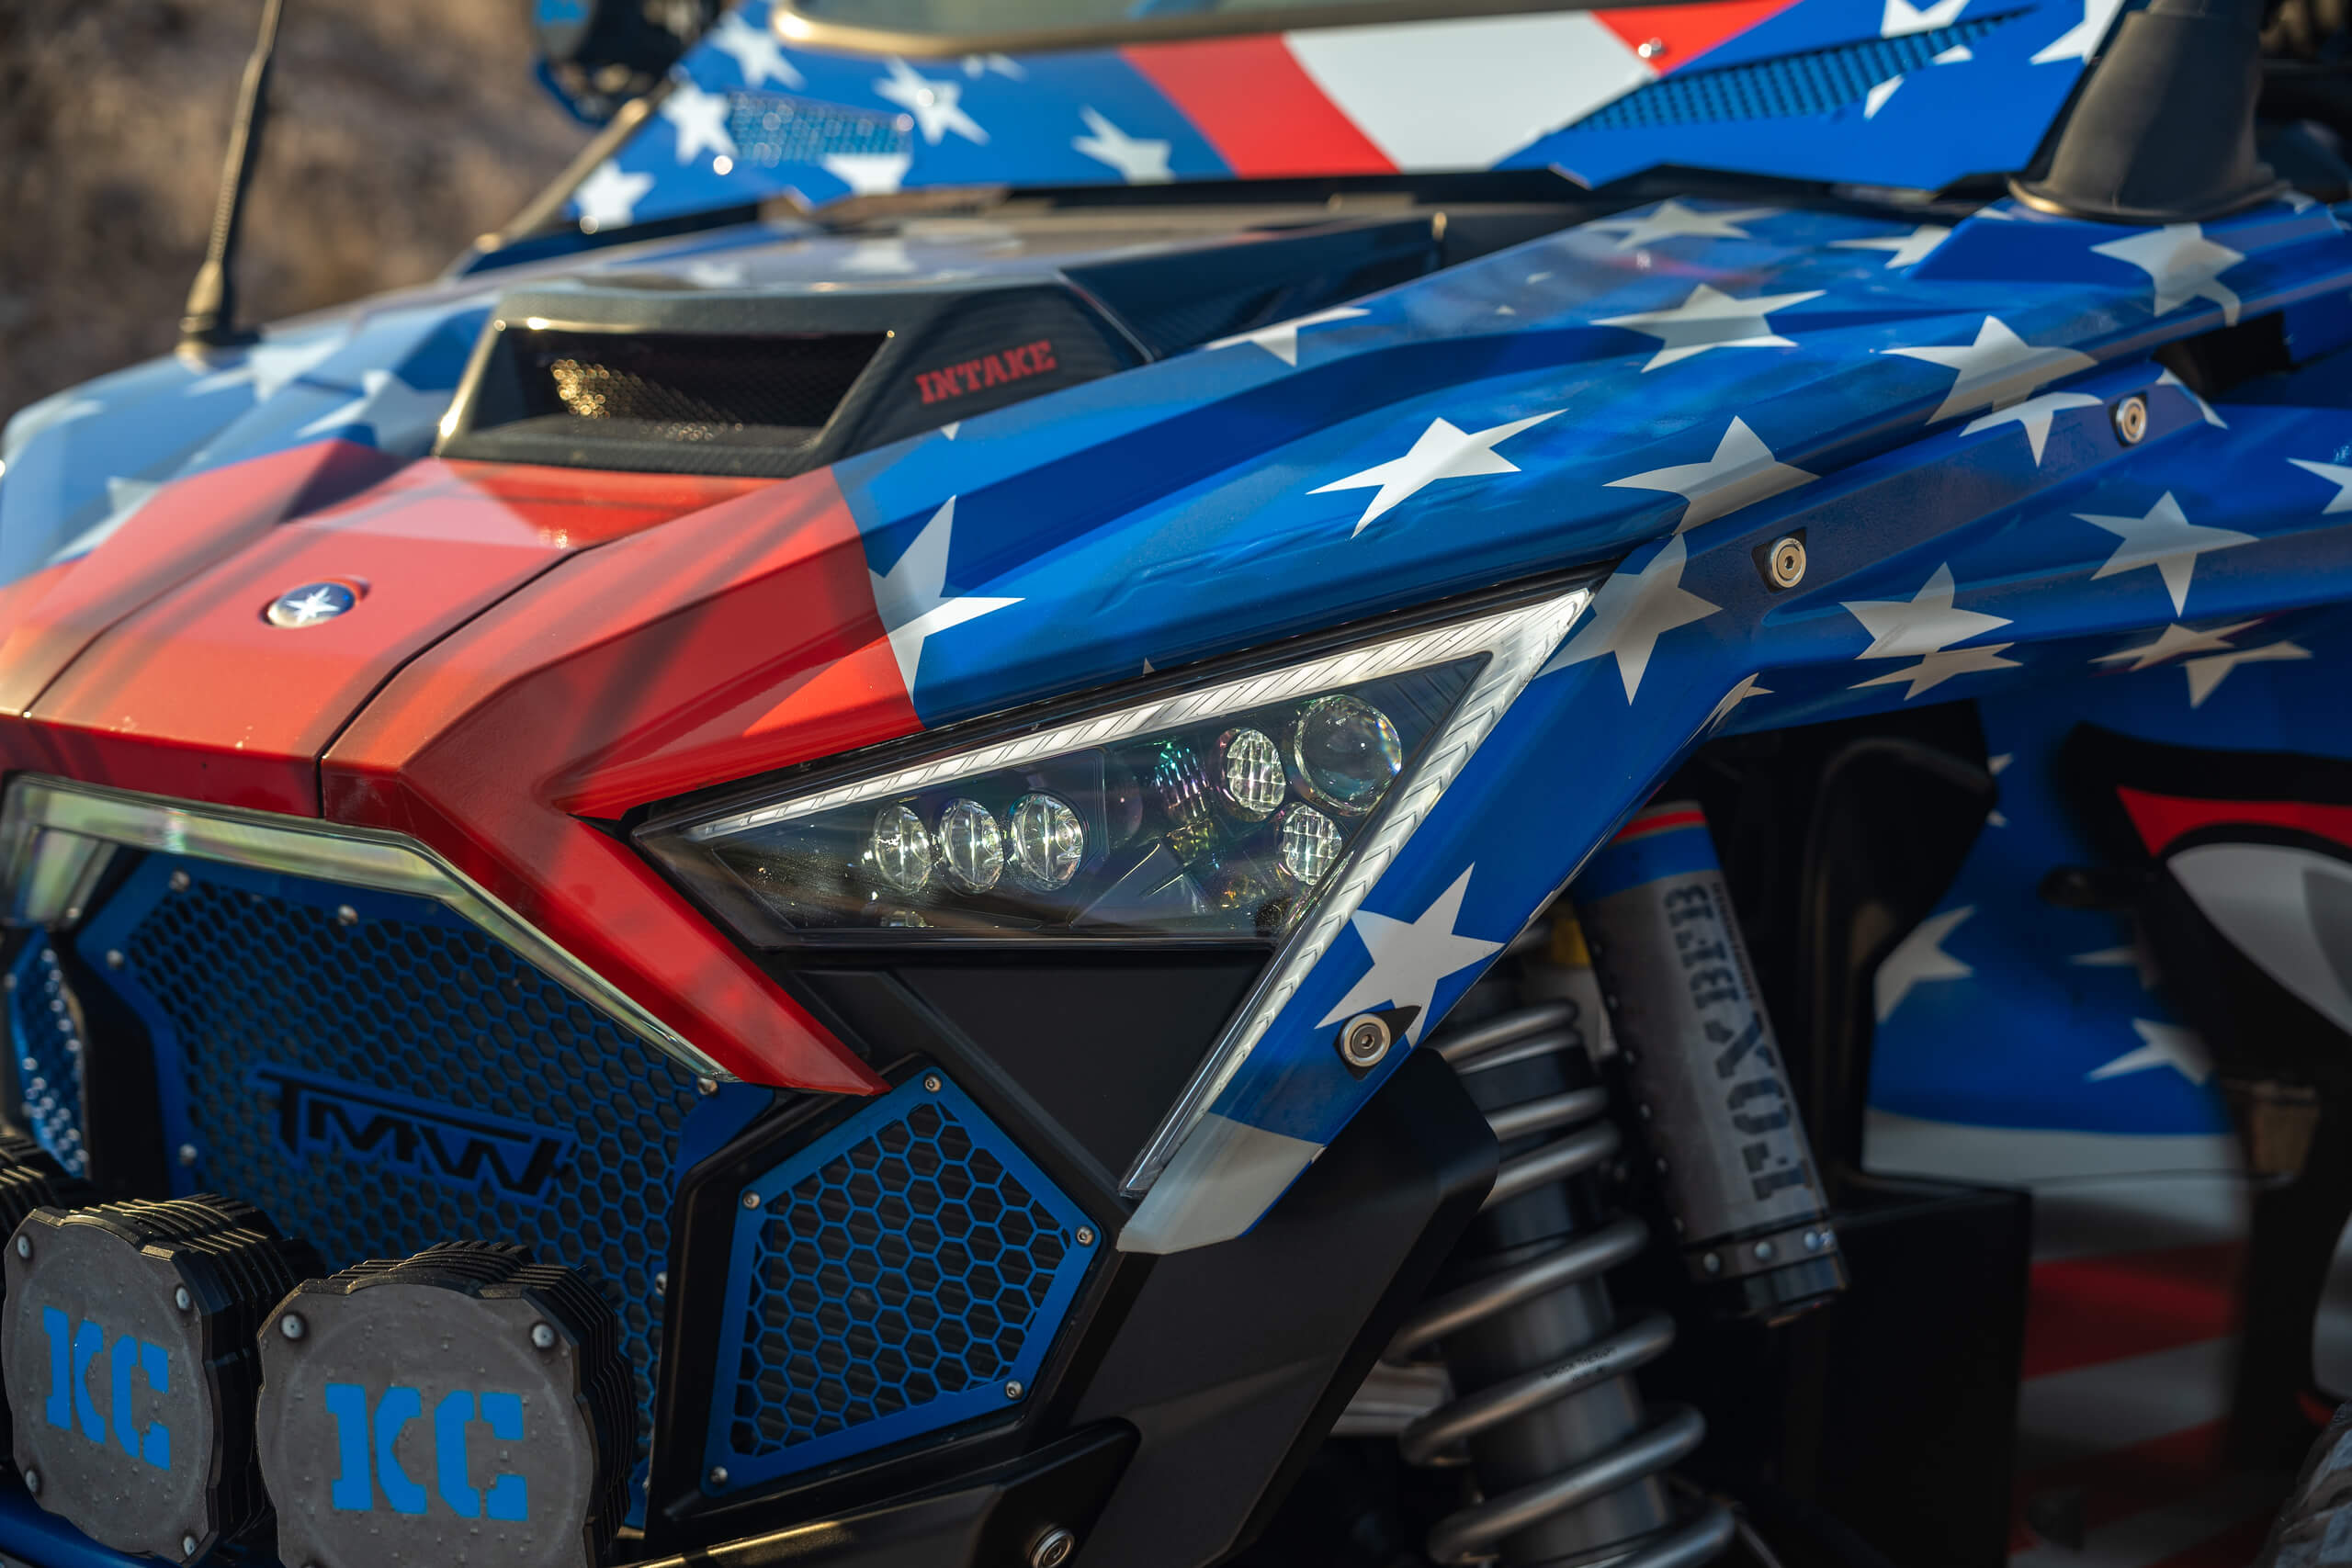 Mike Ericksons Polaris RZR Pro R Custom Build By Jagged X Offroad 4